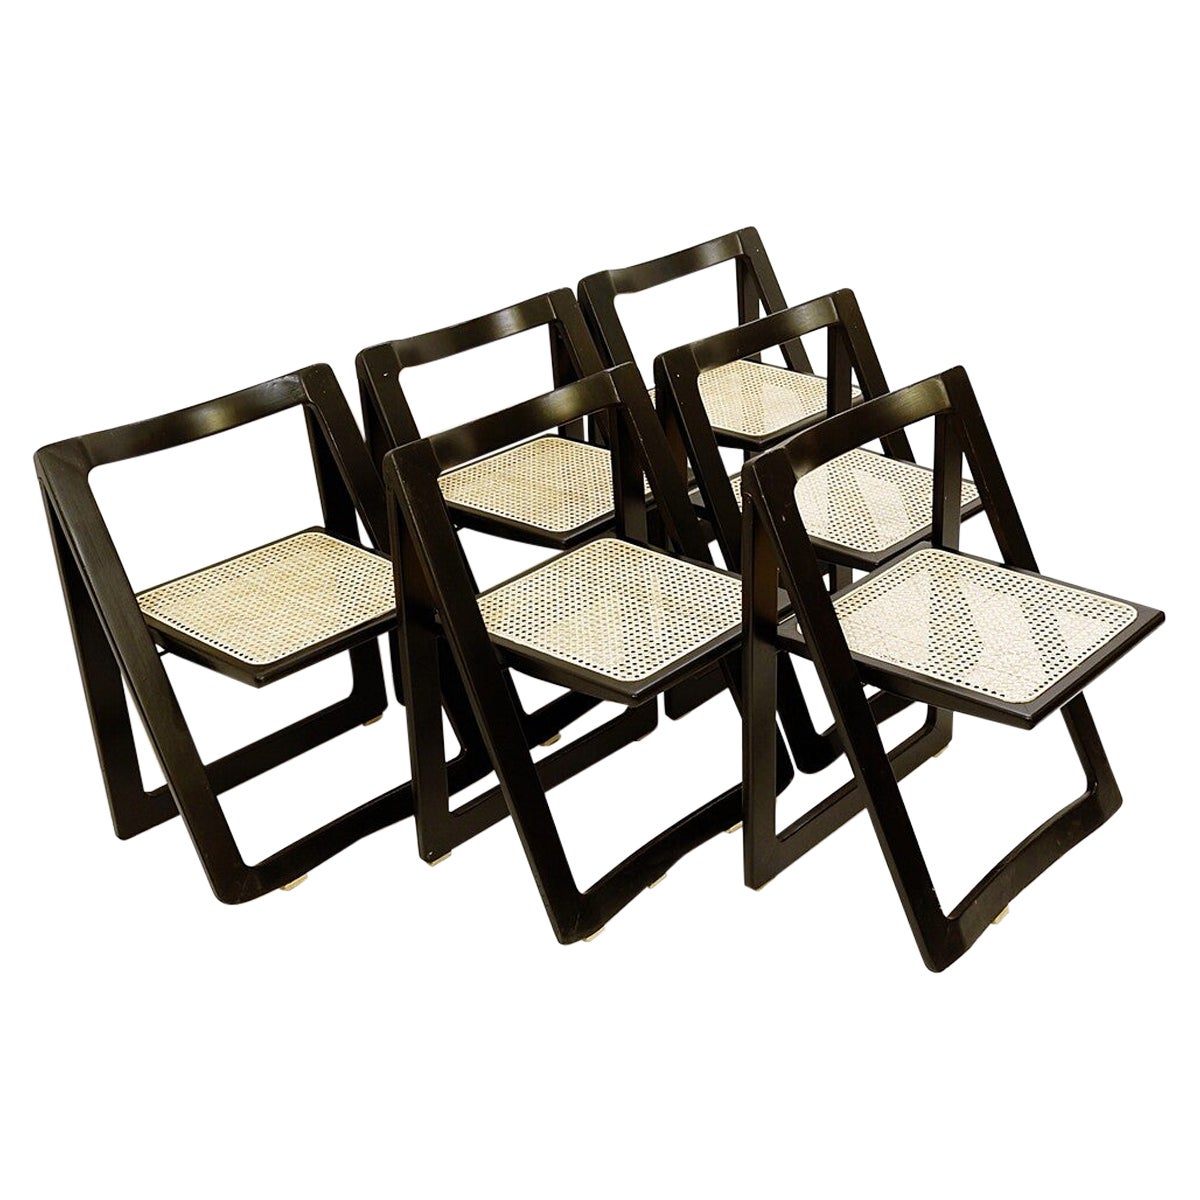 "Trieste" Chairs by Jacober & d'Aniello for Bazzani, 1960's, Set of 6